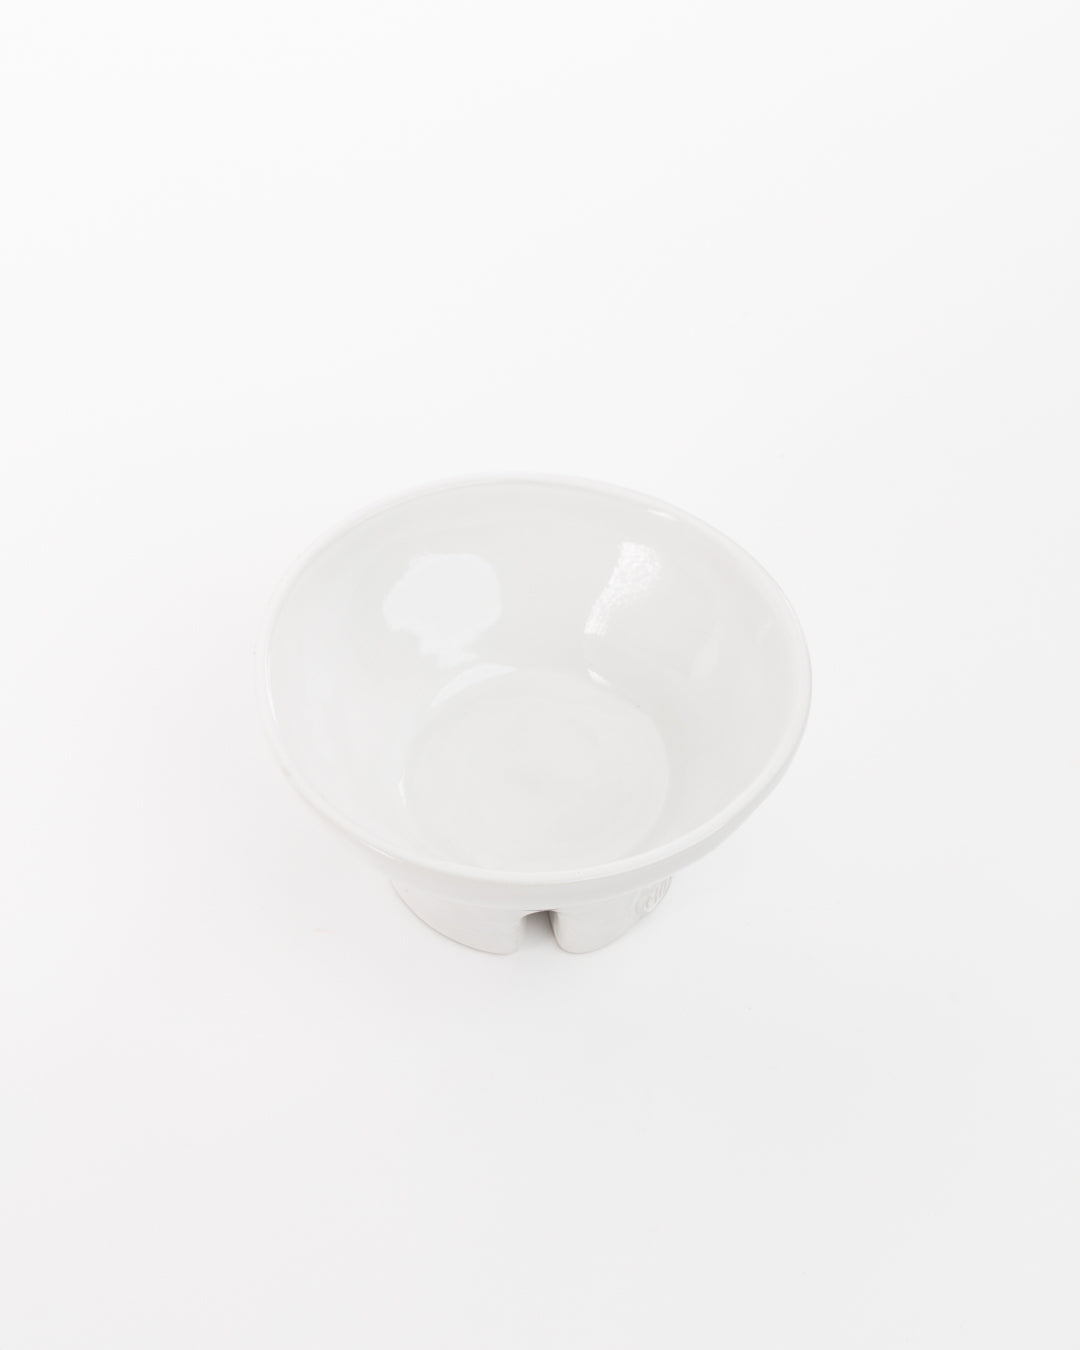 A simple white ceramic Catchall Bowl No. 257 from Montes Doggett positioned on a plain white background. The bowl's interior is visible, showing a plain and clean surface.